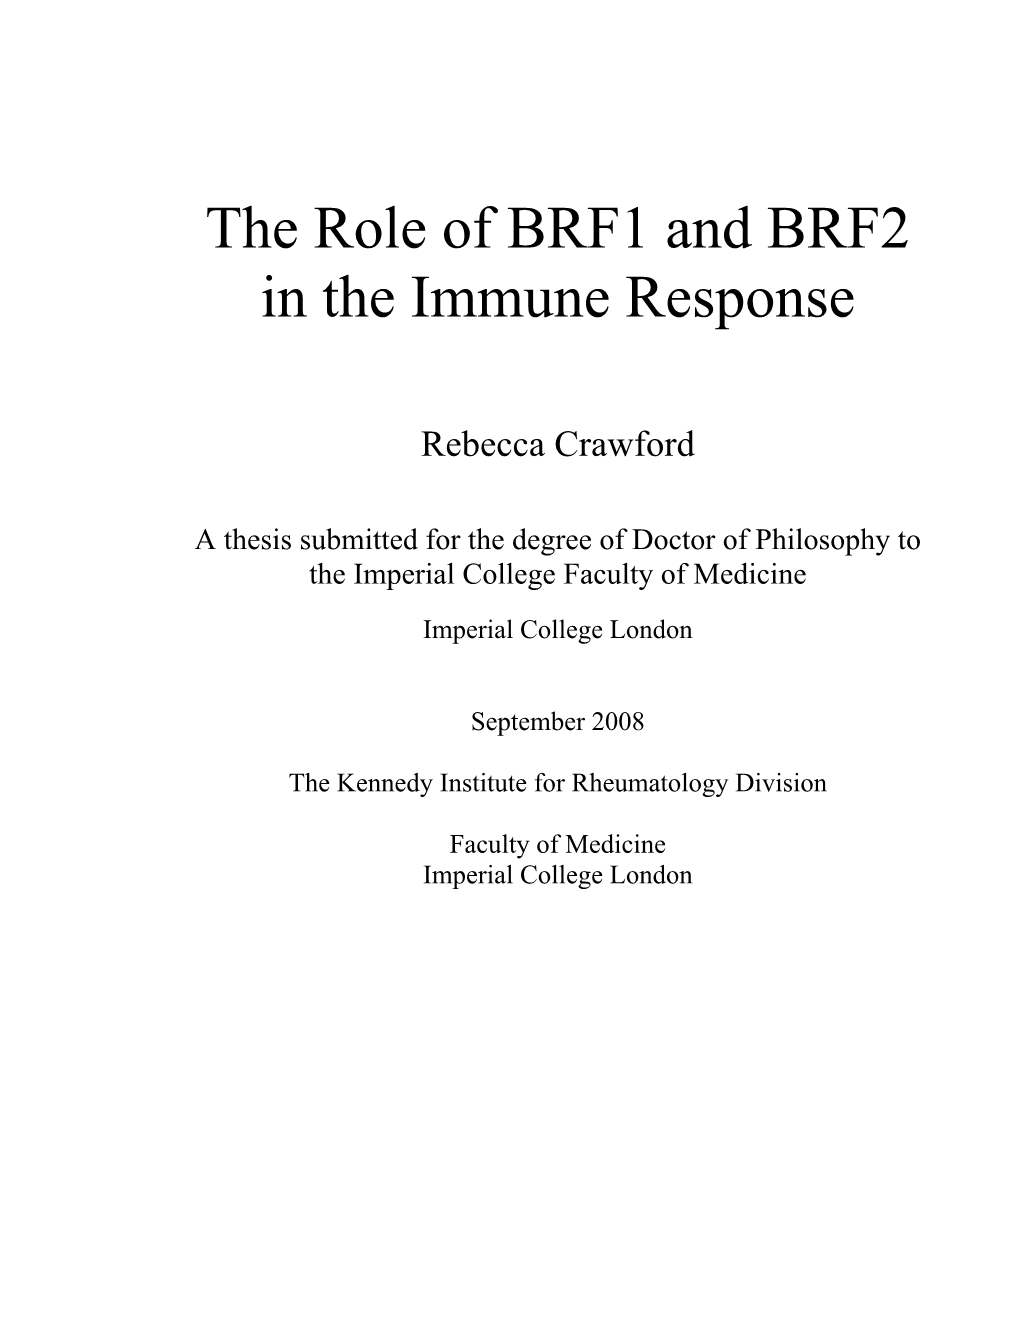 The Role of BRF1 and BRF2 in the Immune Response